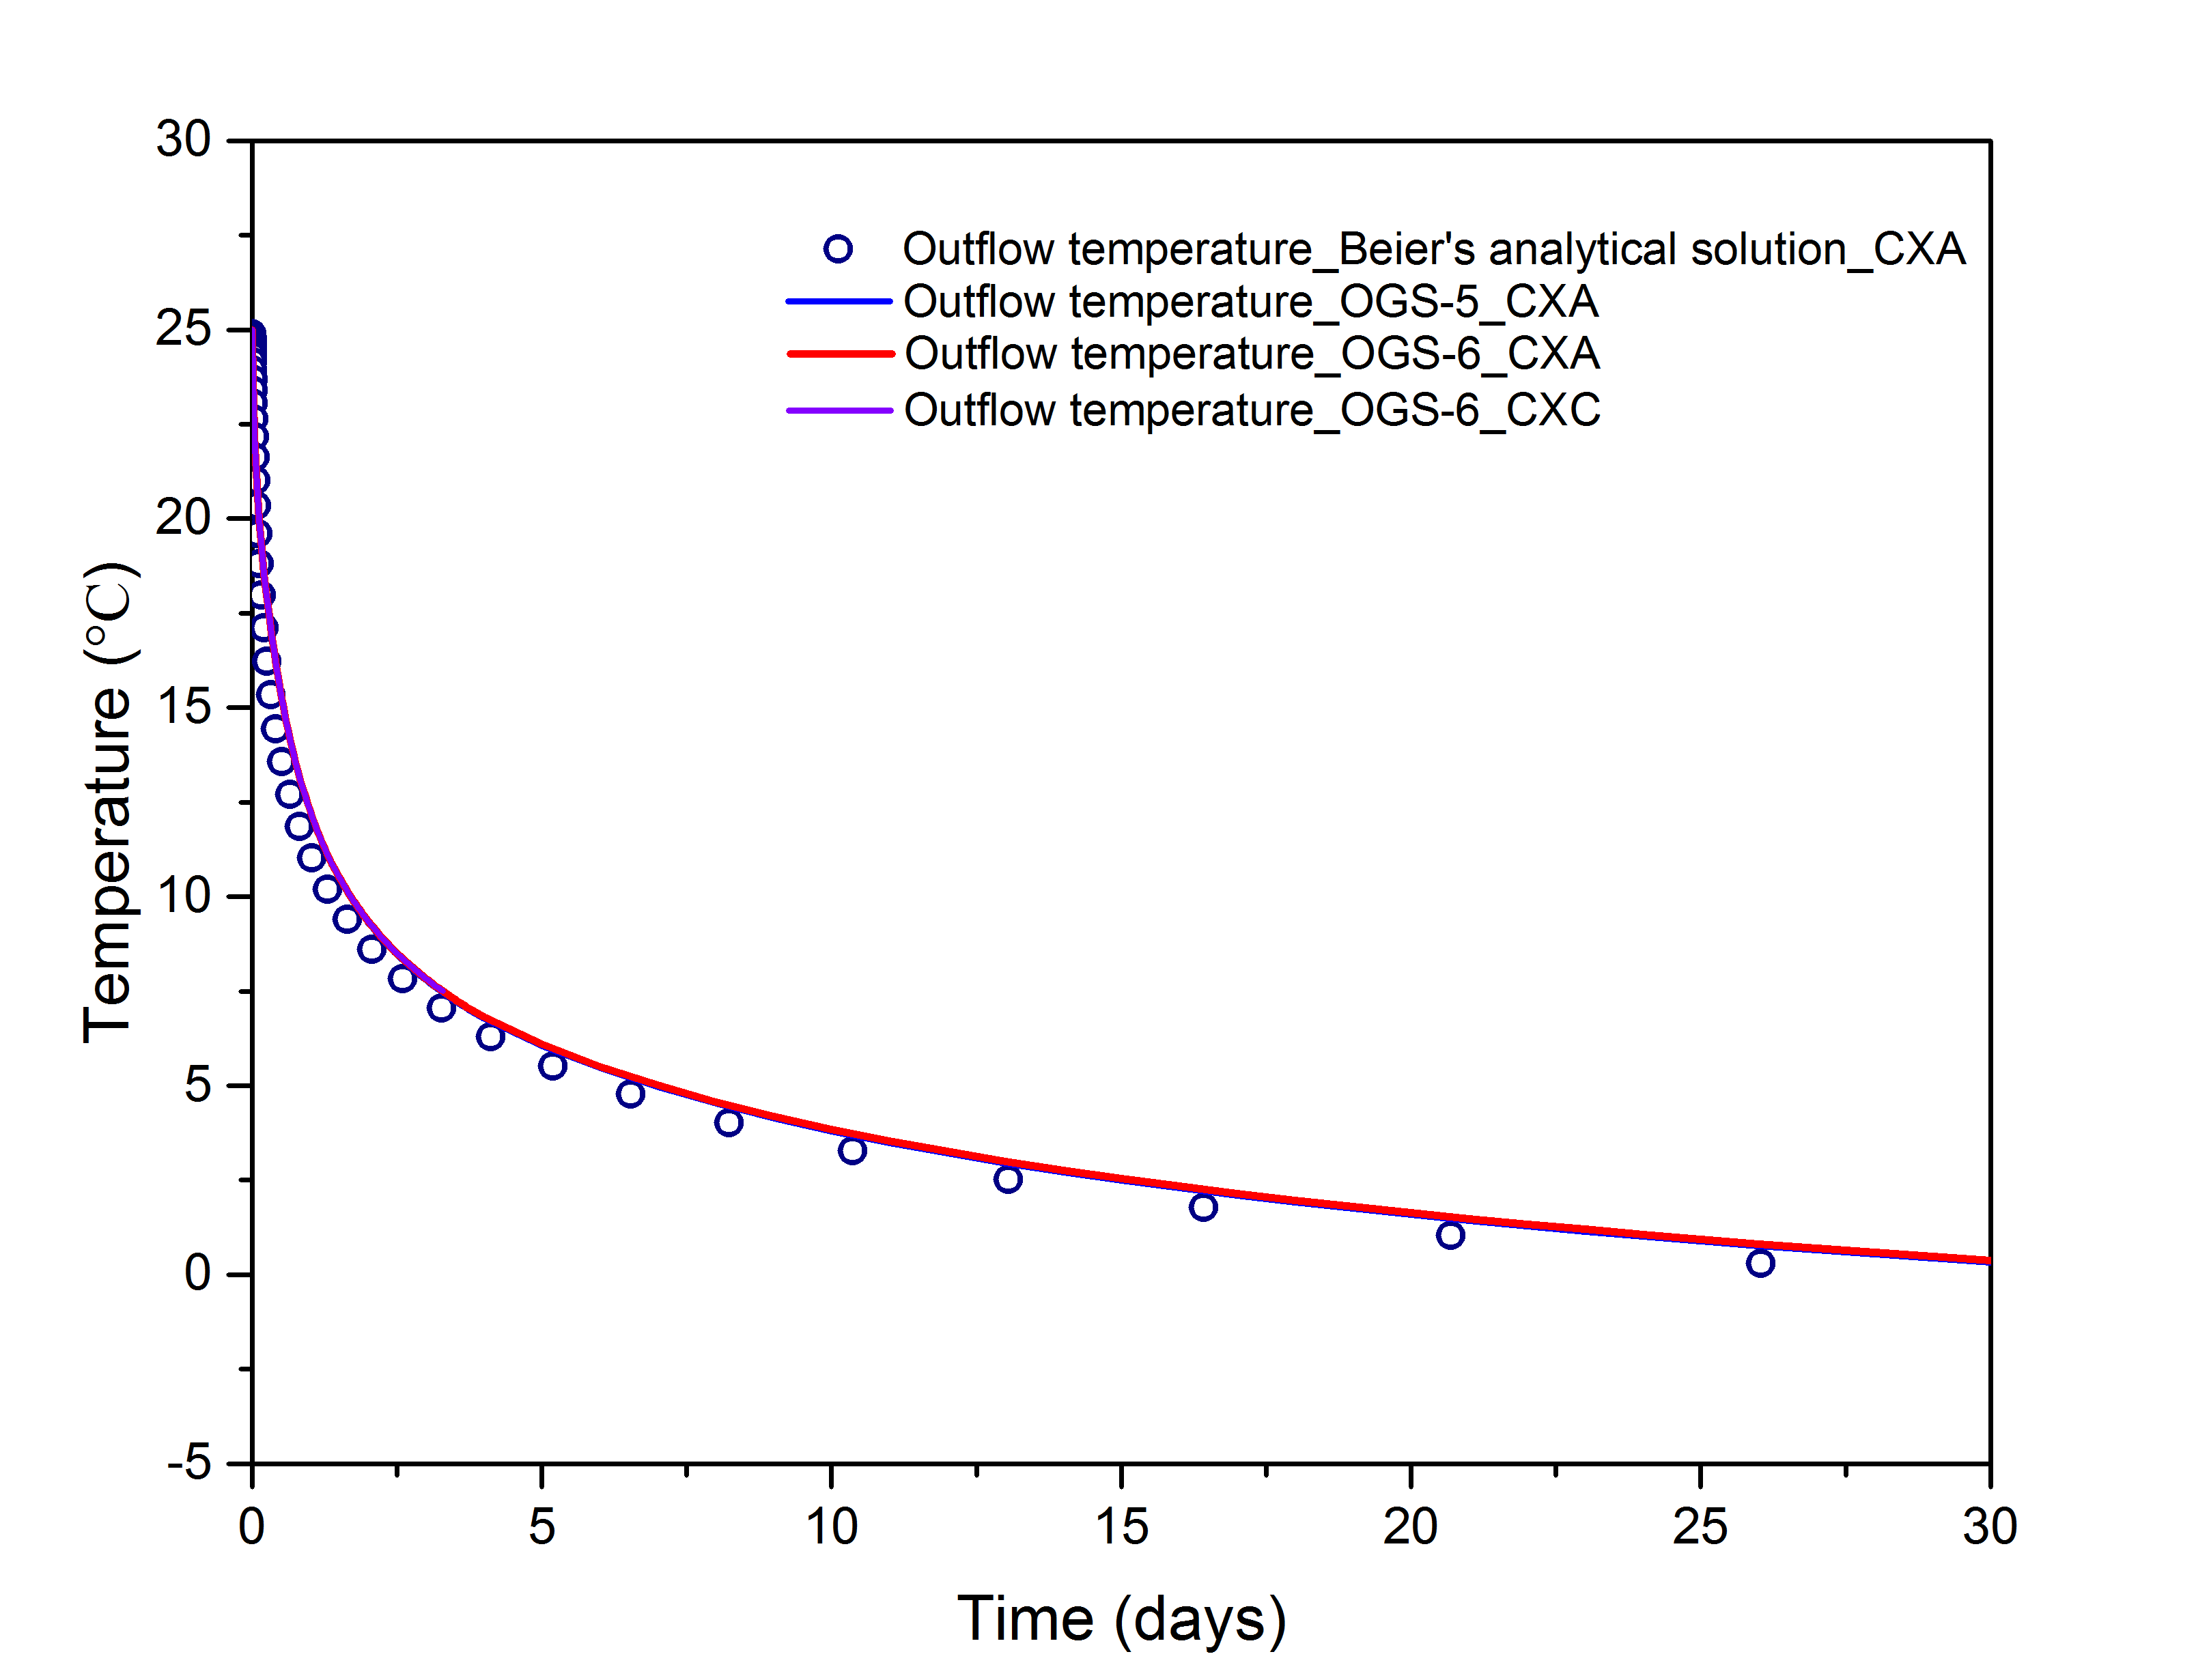 Comparison with analytical solution and OGS-5 results